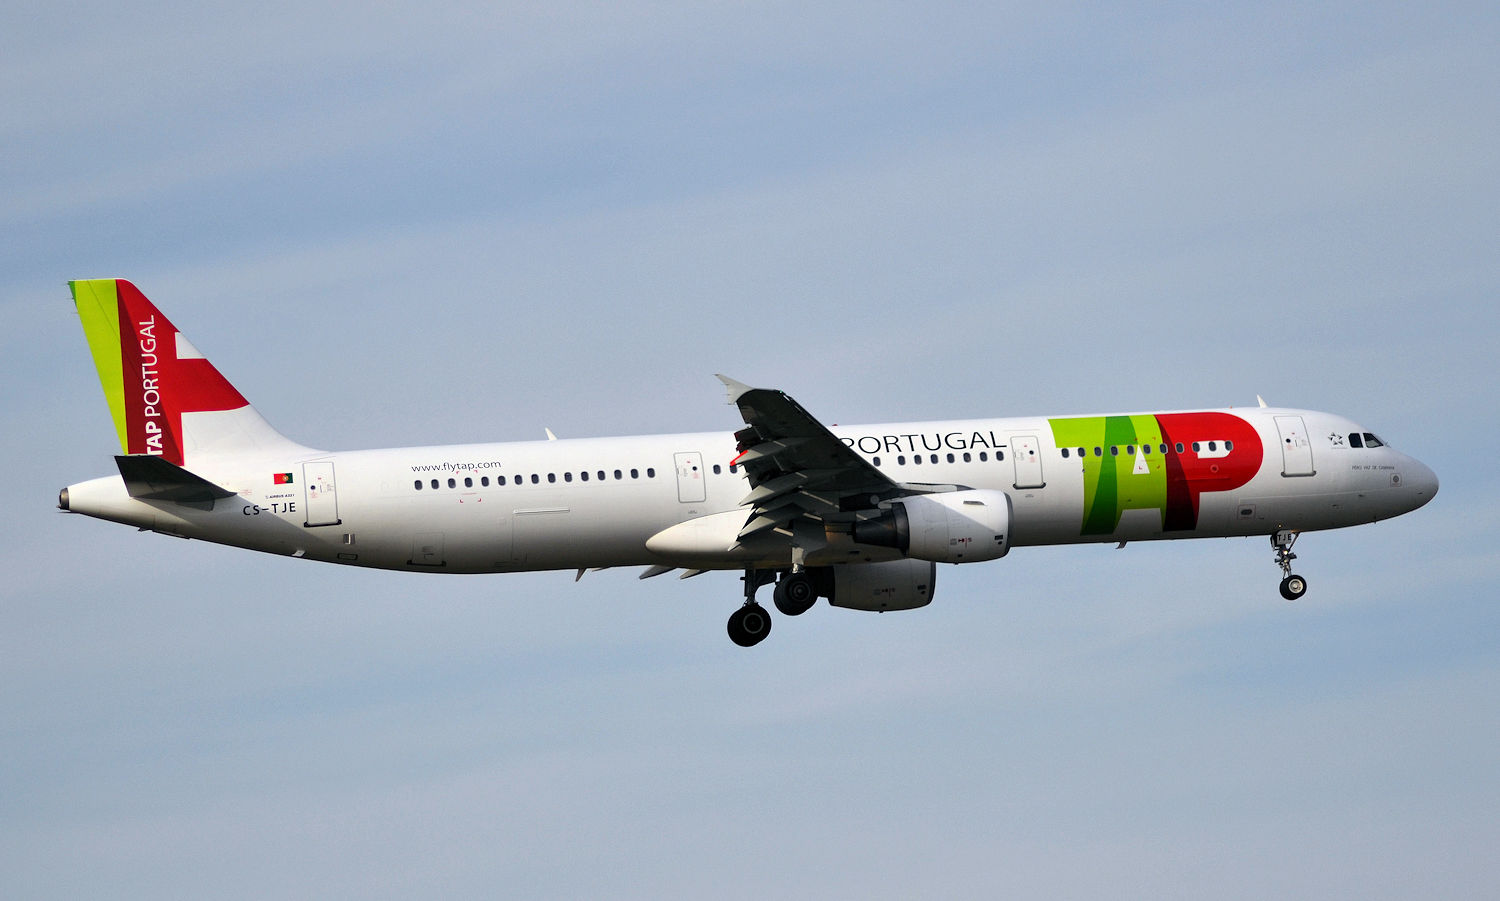 CS-TJE/CSTJE TAP Air Portugal Airbus A321-211 Photo by Warthog1 - AVSpotters.com